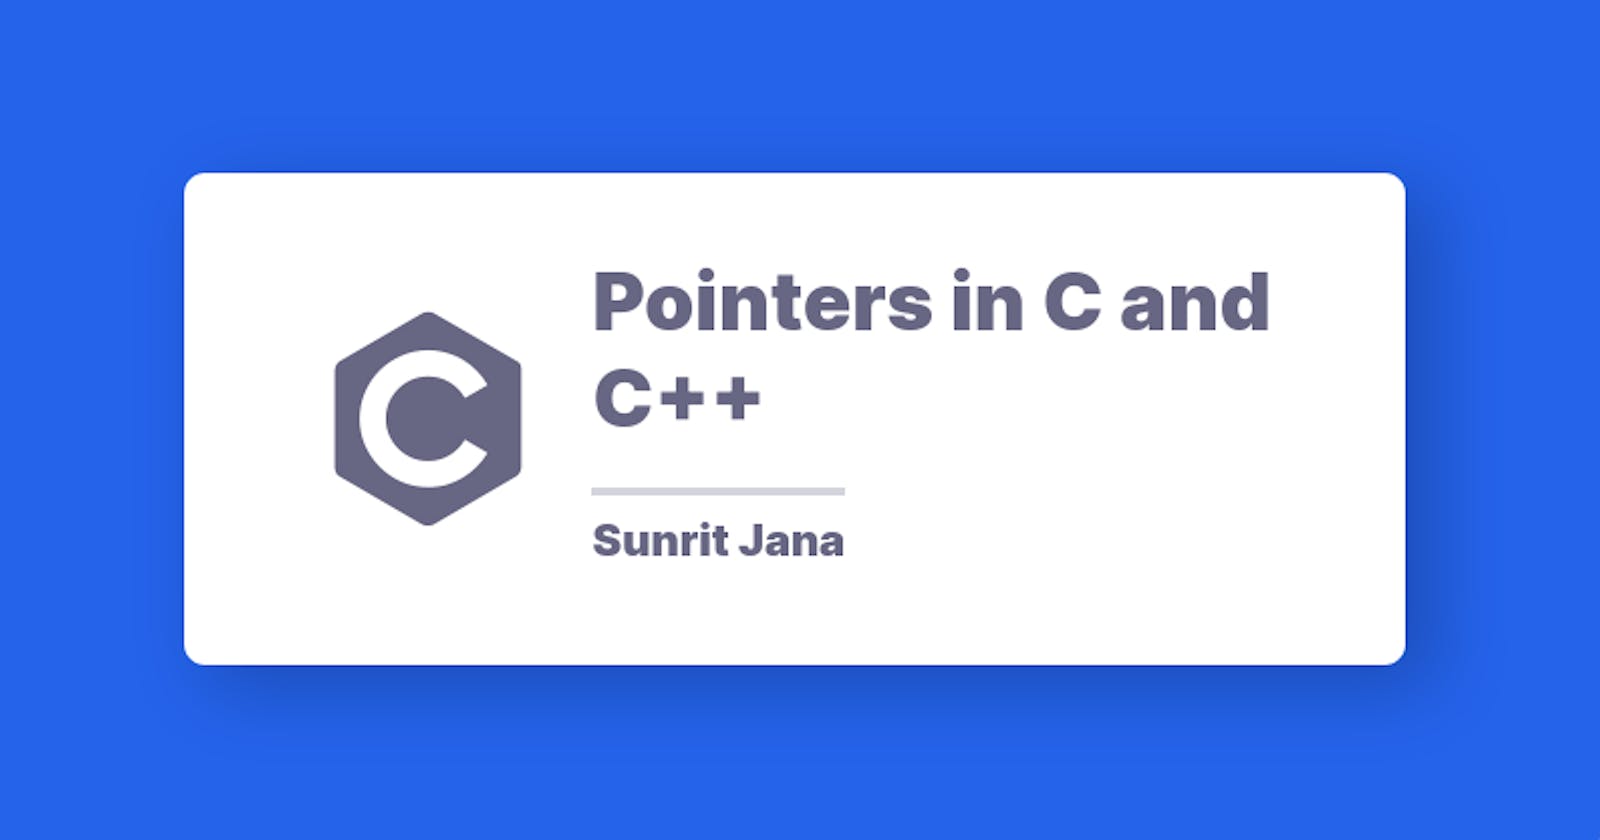 Pointers in C and C++